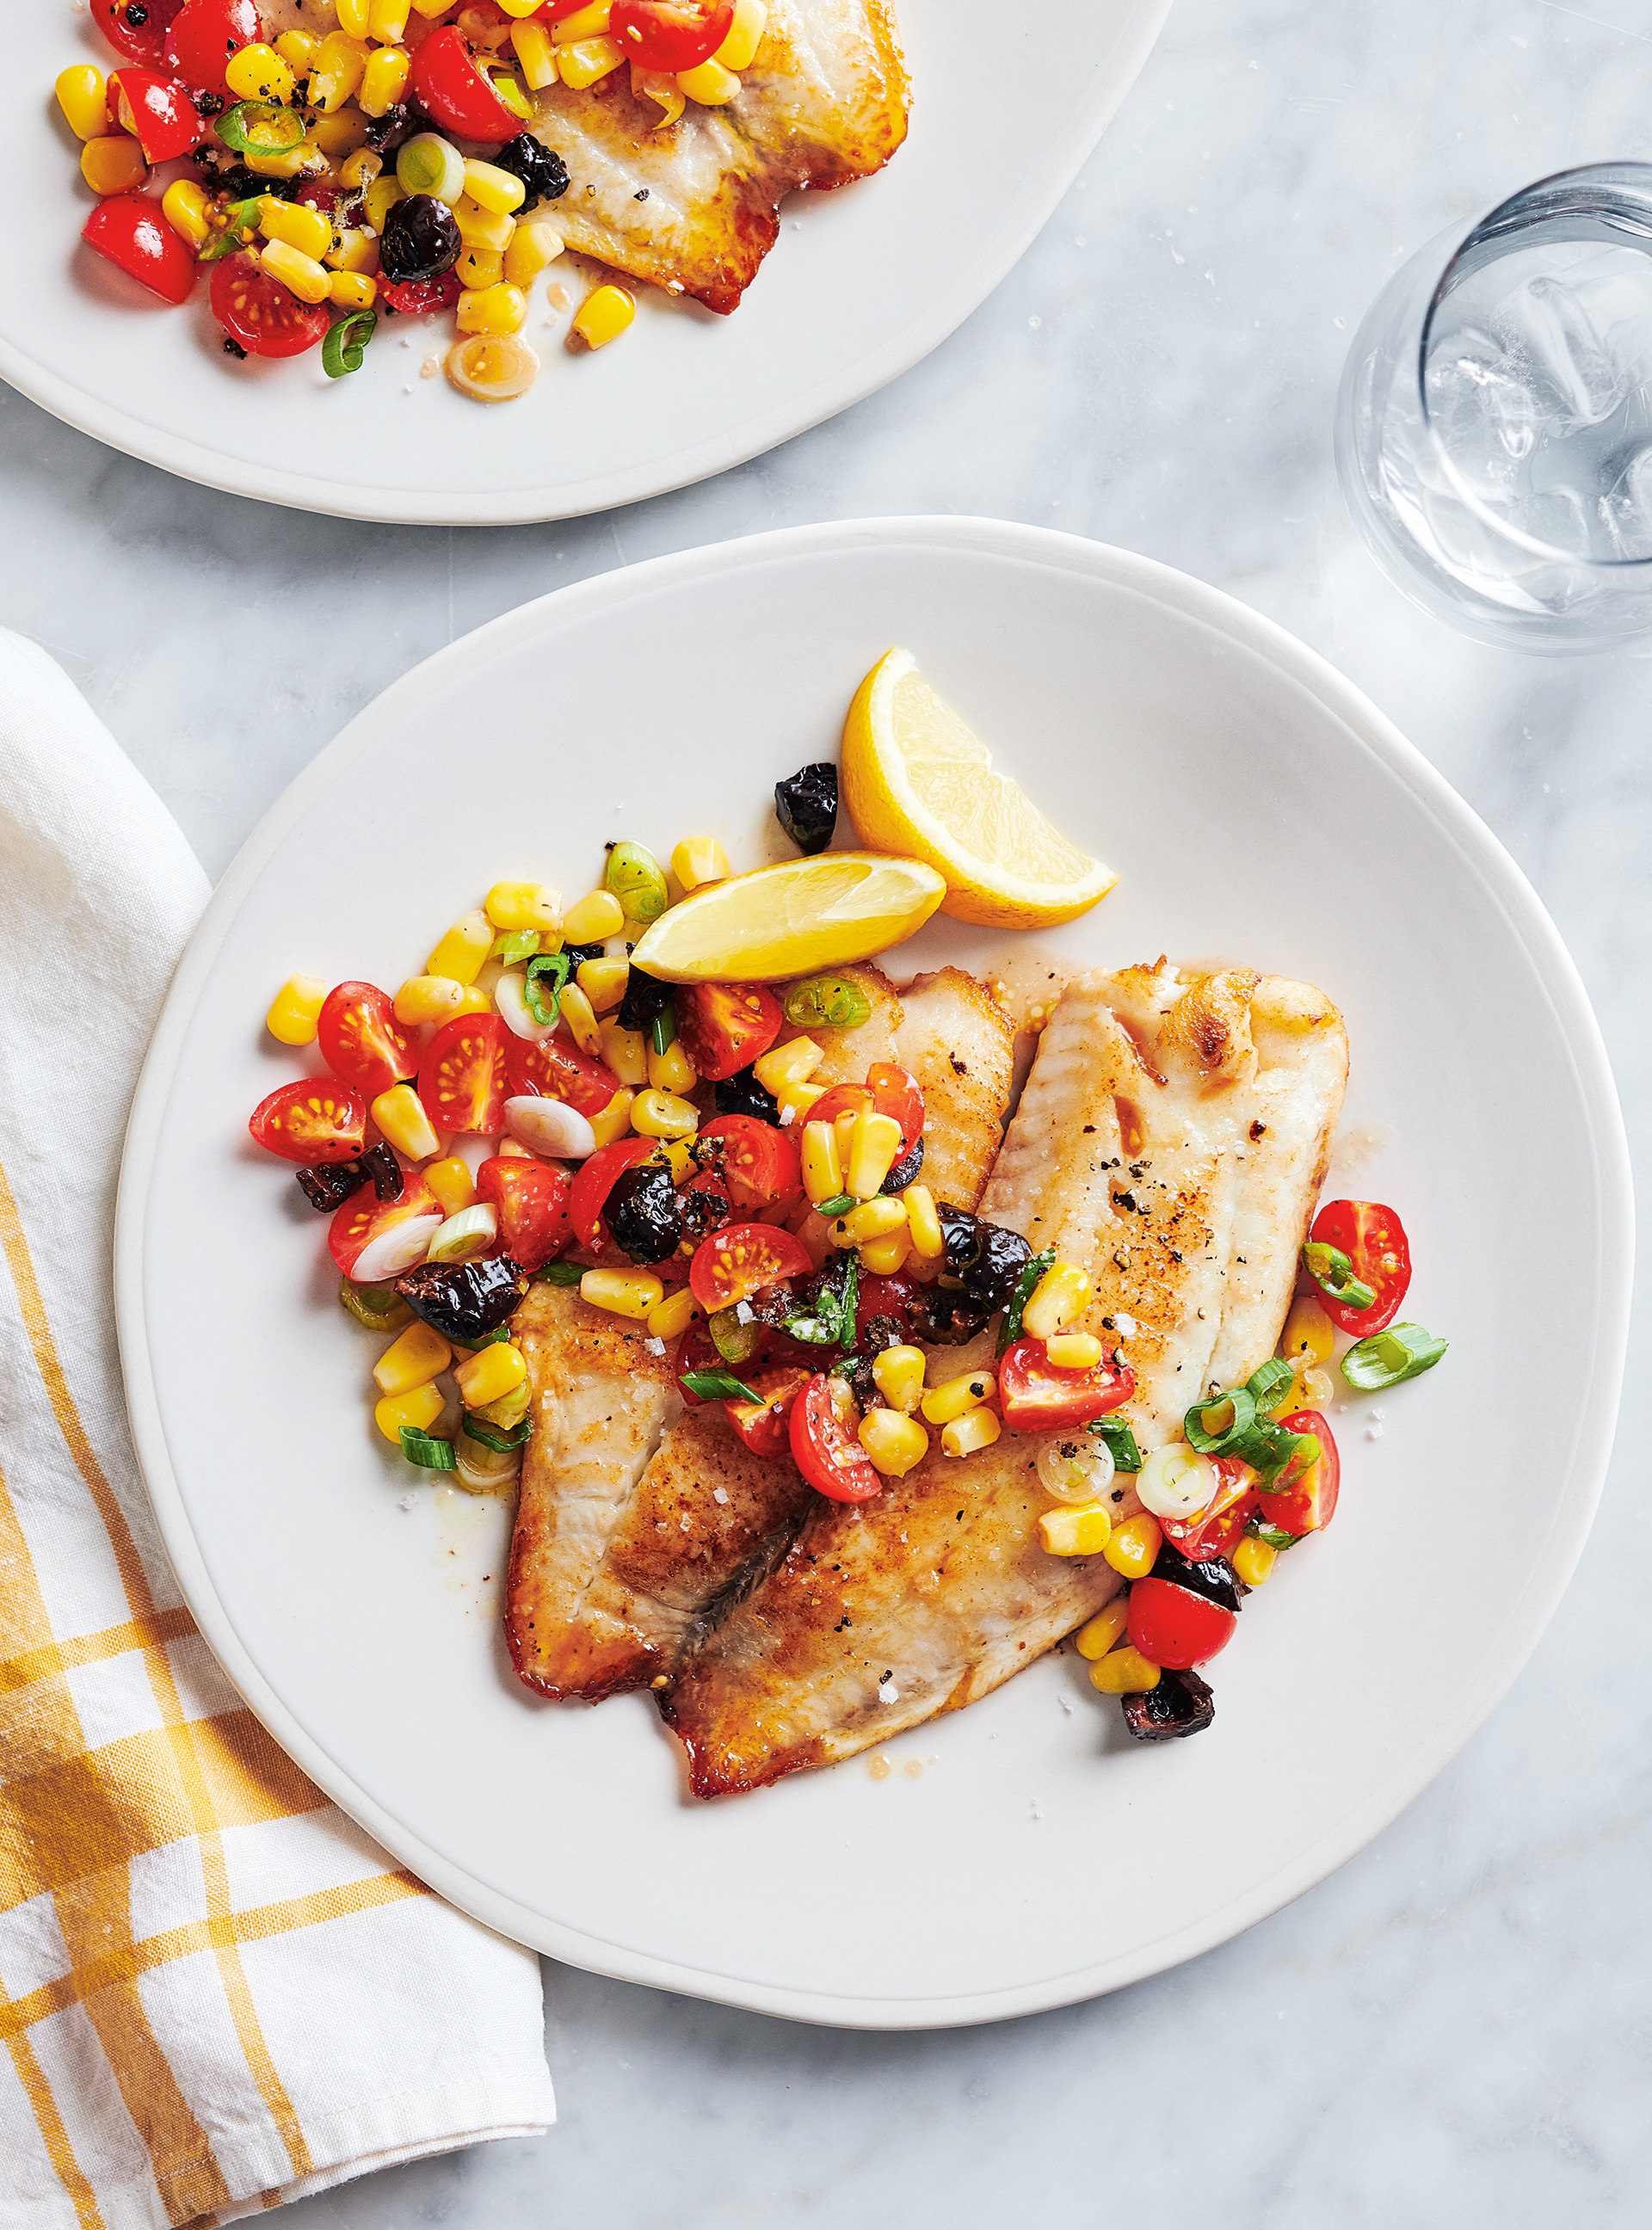 Seared Tilapia with Corn and Cherry Tomato Salad